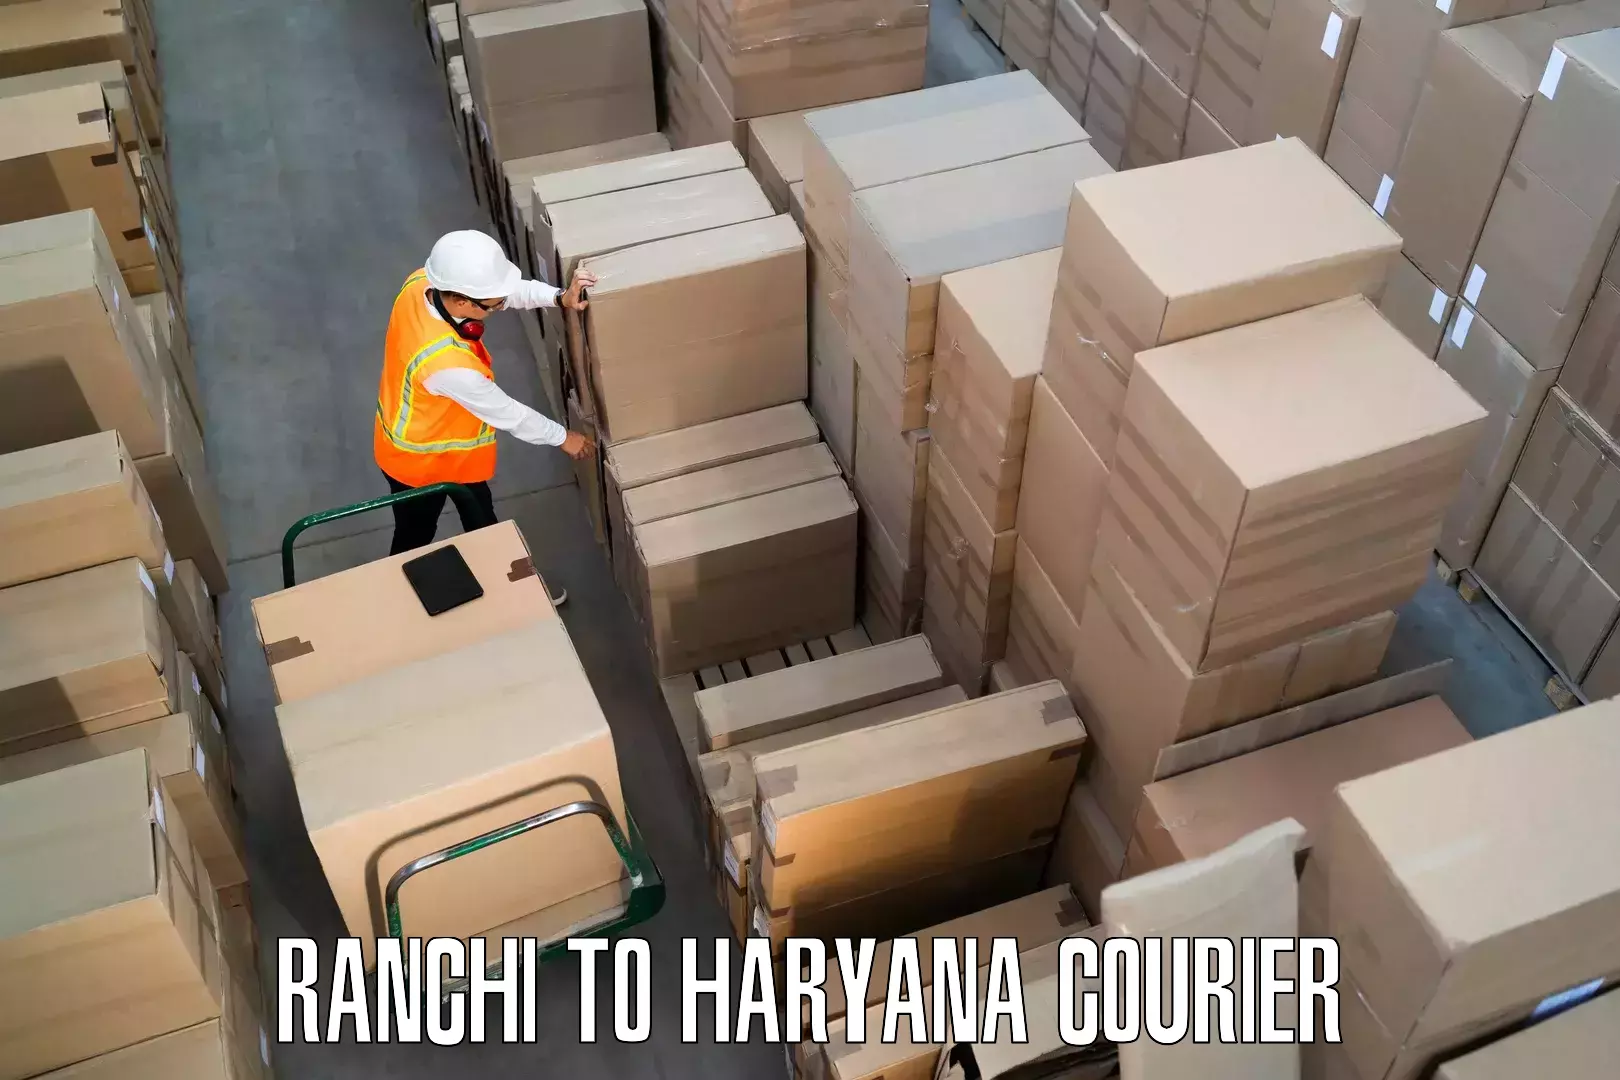 Furniture delivery service Ranchi to Pinjore